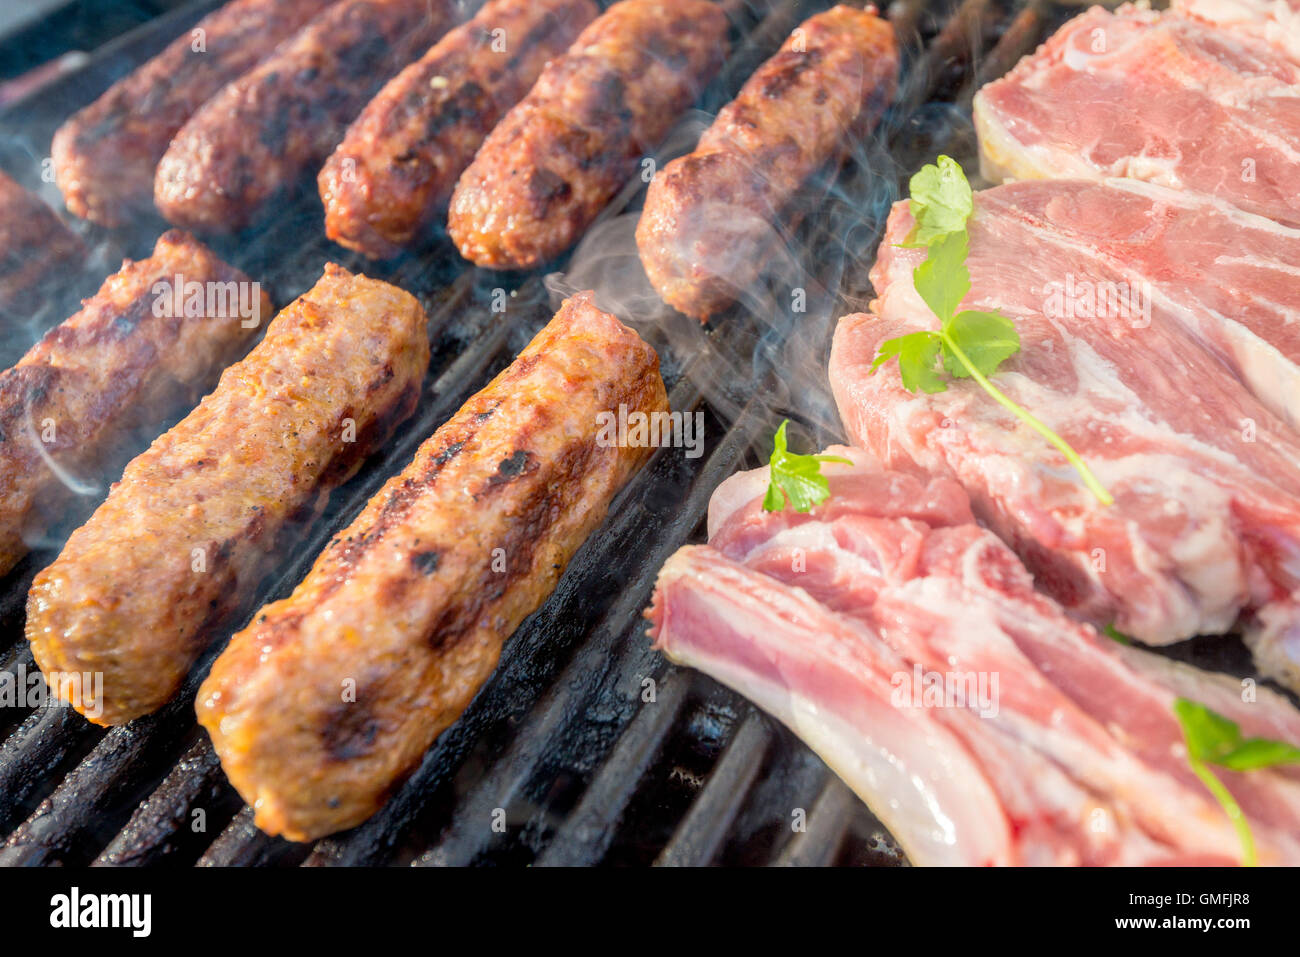 Australian Food Bbq High Resolution Stock Photography and Images - Alamy